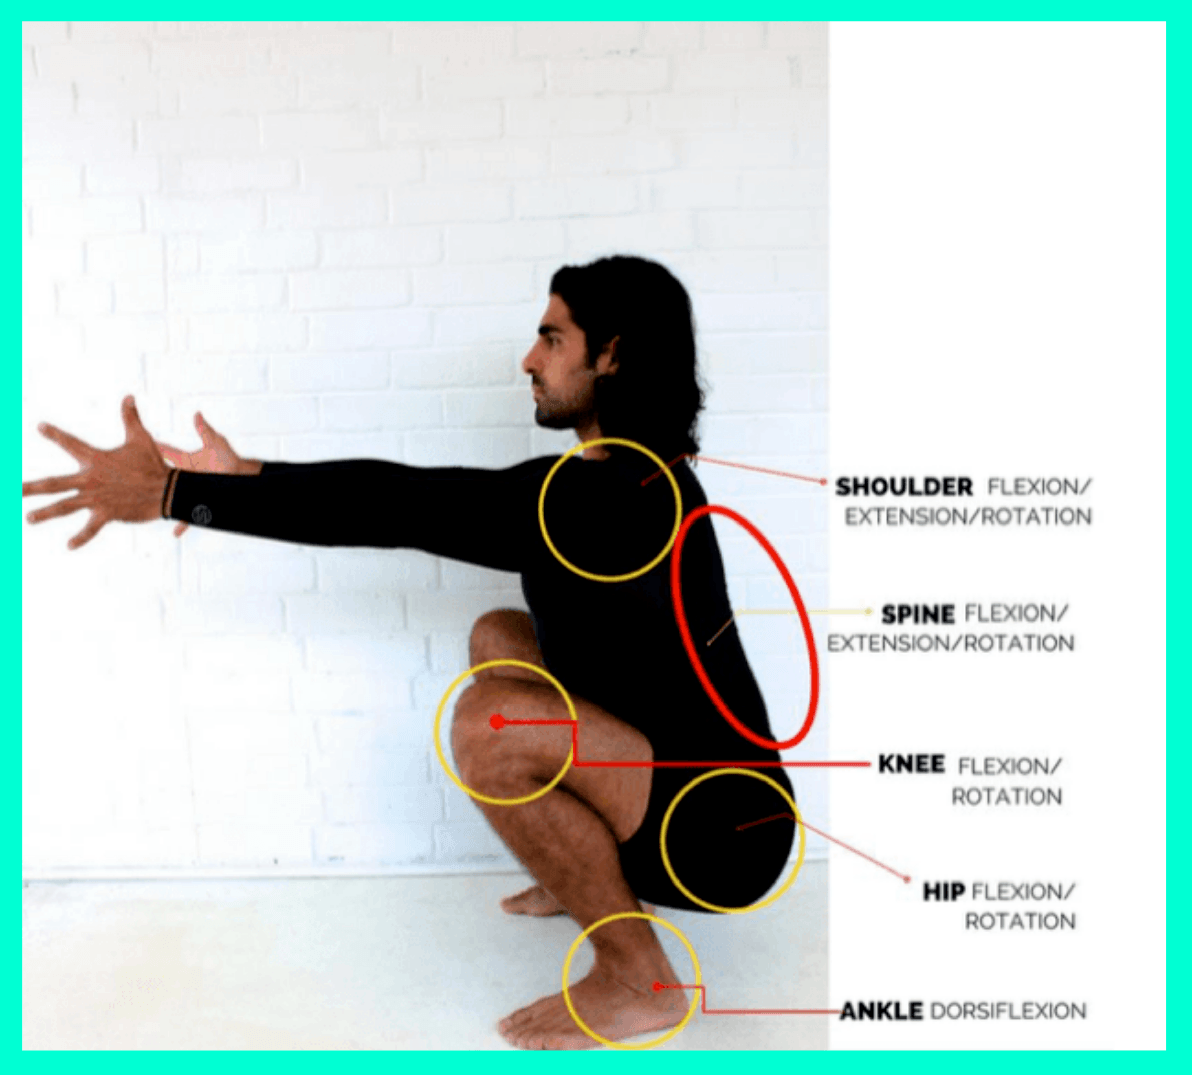 Bottom position of a deep squat demonstrating mobility at the ankle